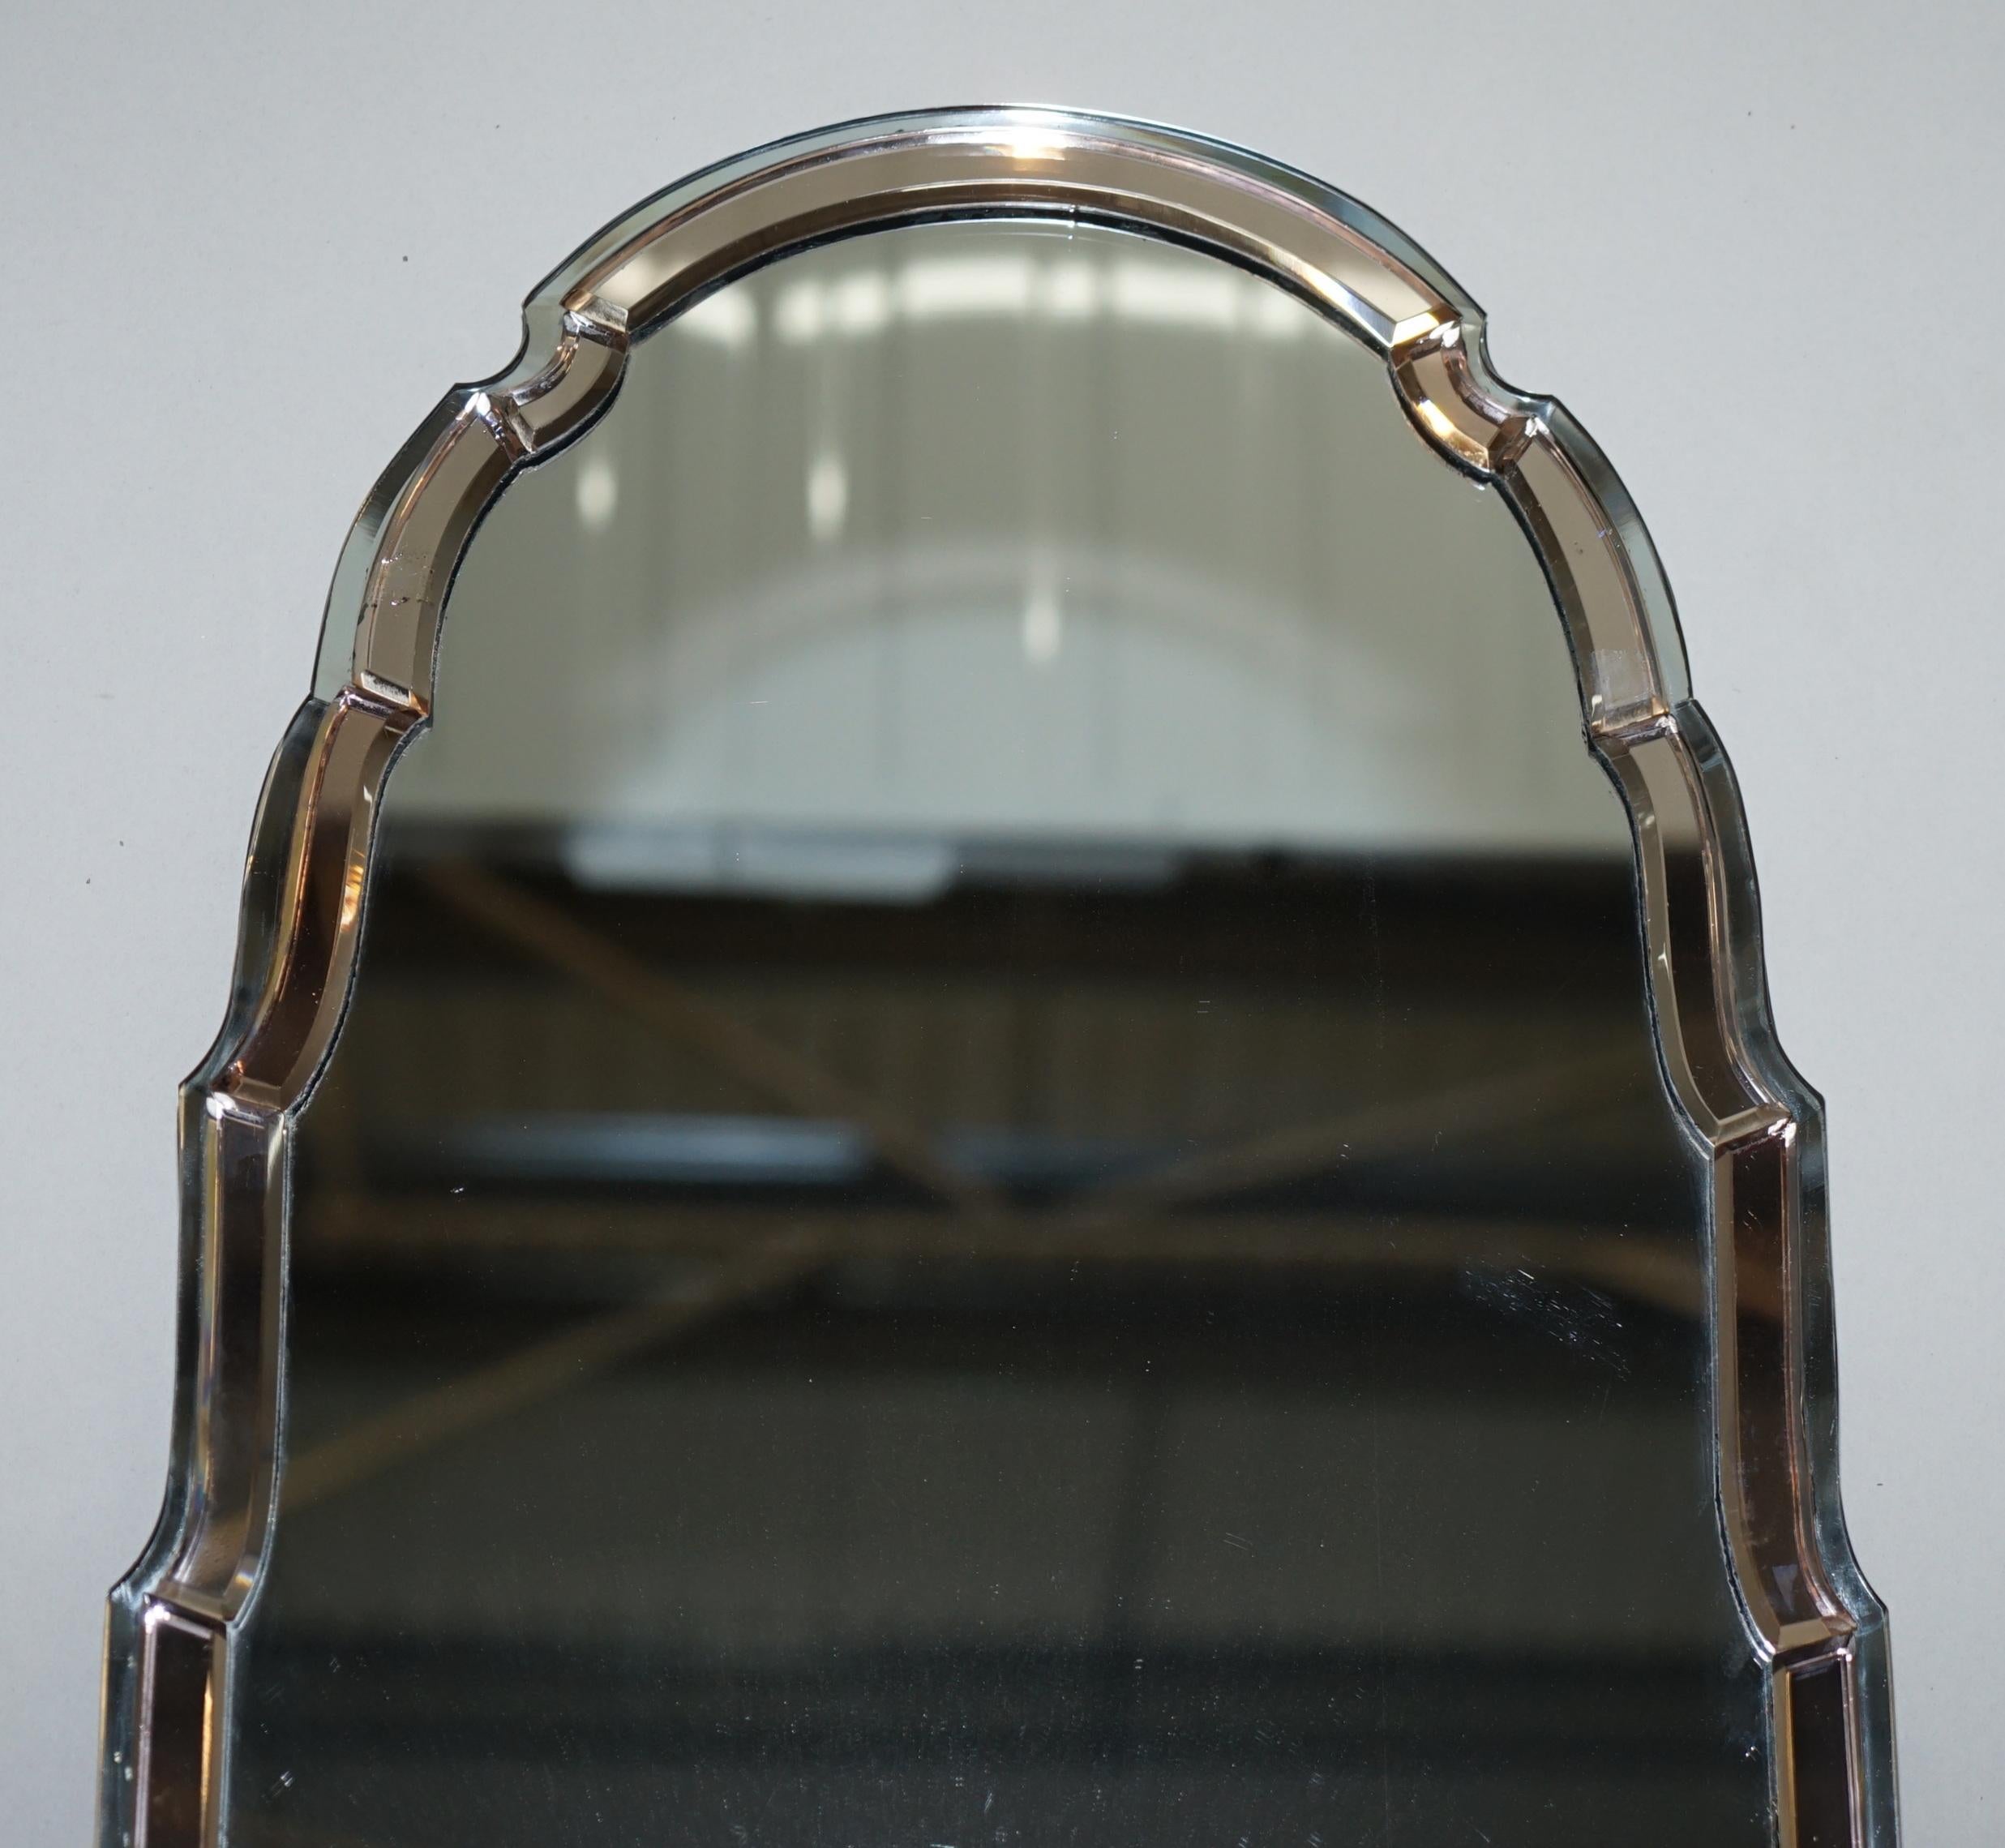 We are delighted to offer for sale this stunning and exceptionally rare circa 1930s Art Deco peach glass Venetian decor mirror with beveled edge frame and curved steeple top 

A very good looking well made and decorative wall mirror, these are